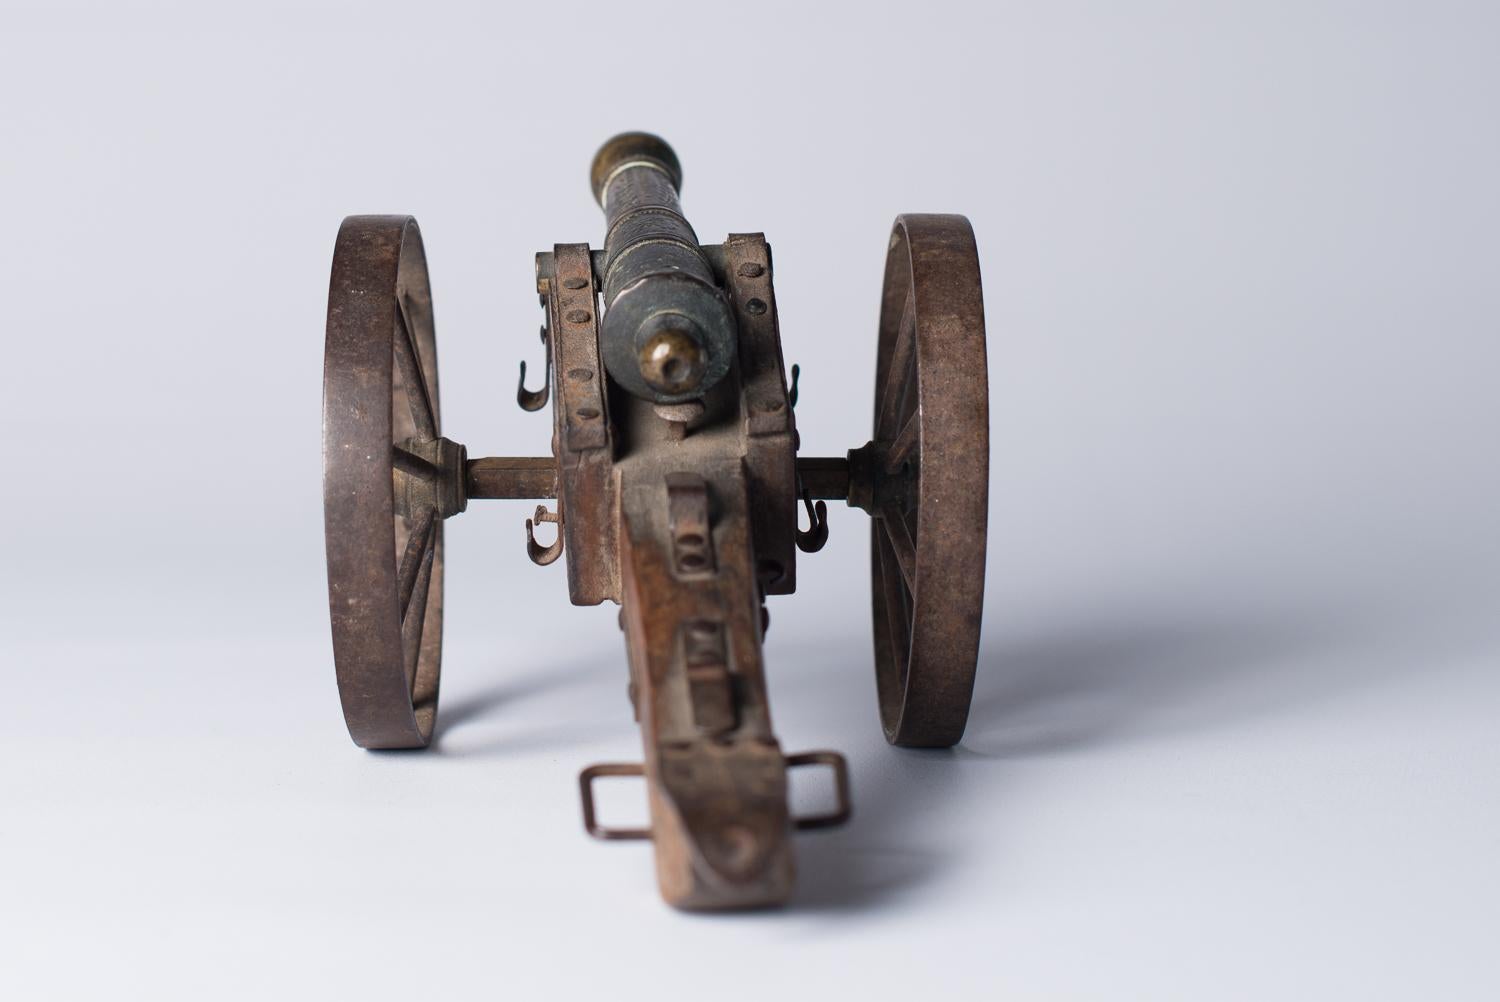 Cast Miniature Patinated Bronze Canon on a Wooden Field Gun-Carriage, 19th Century